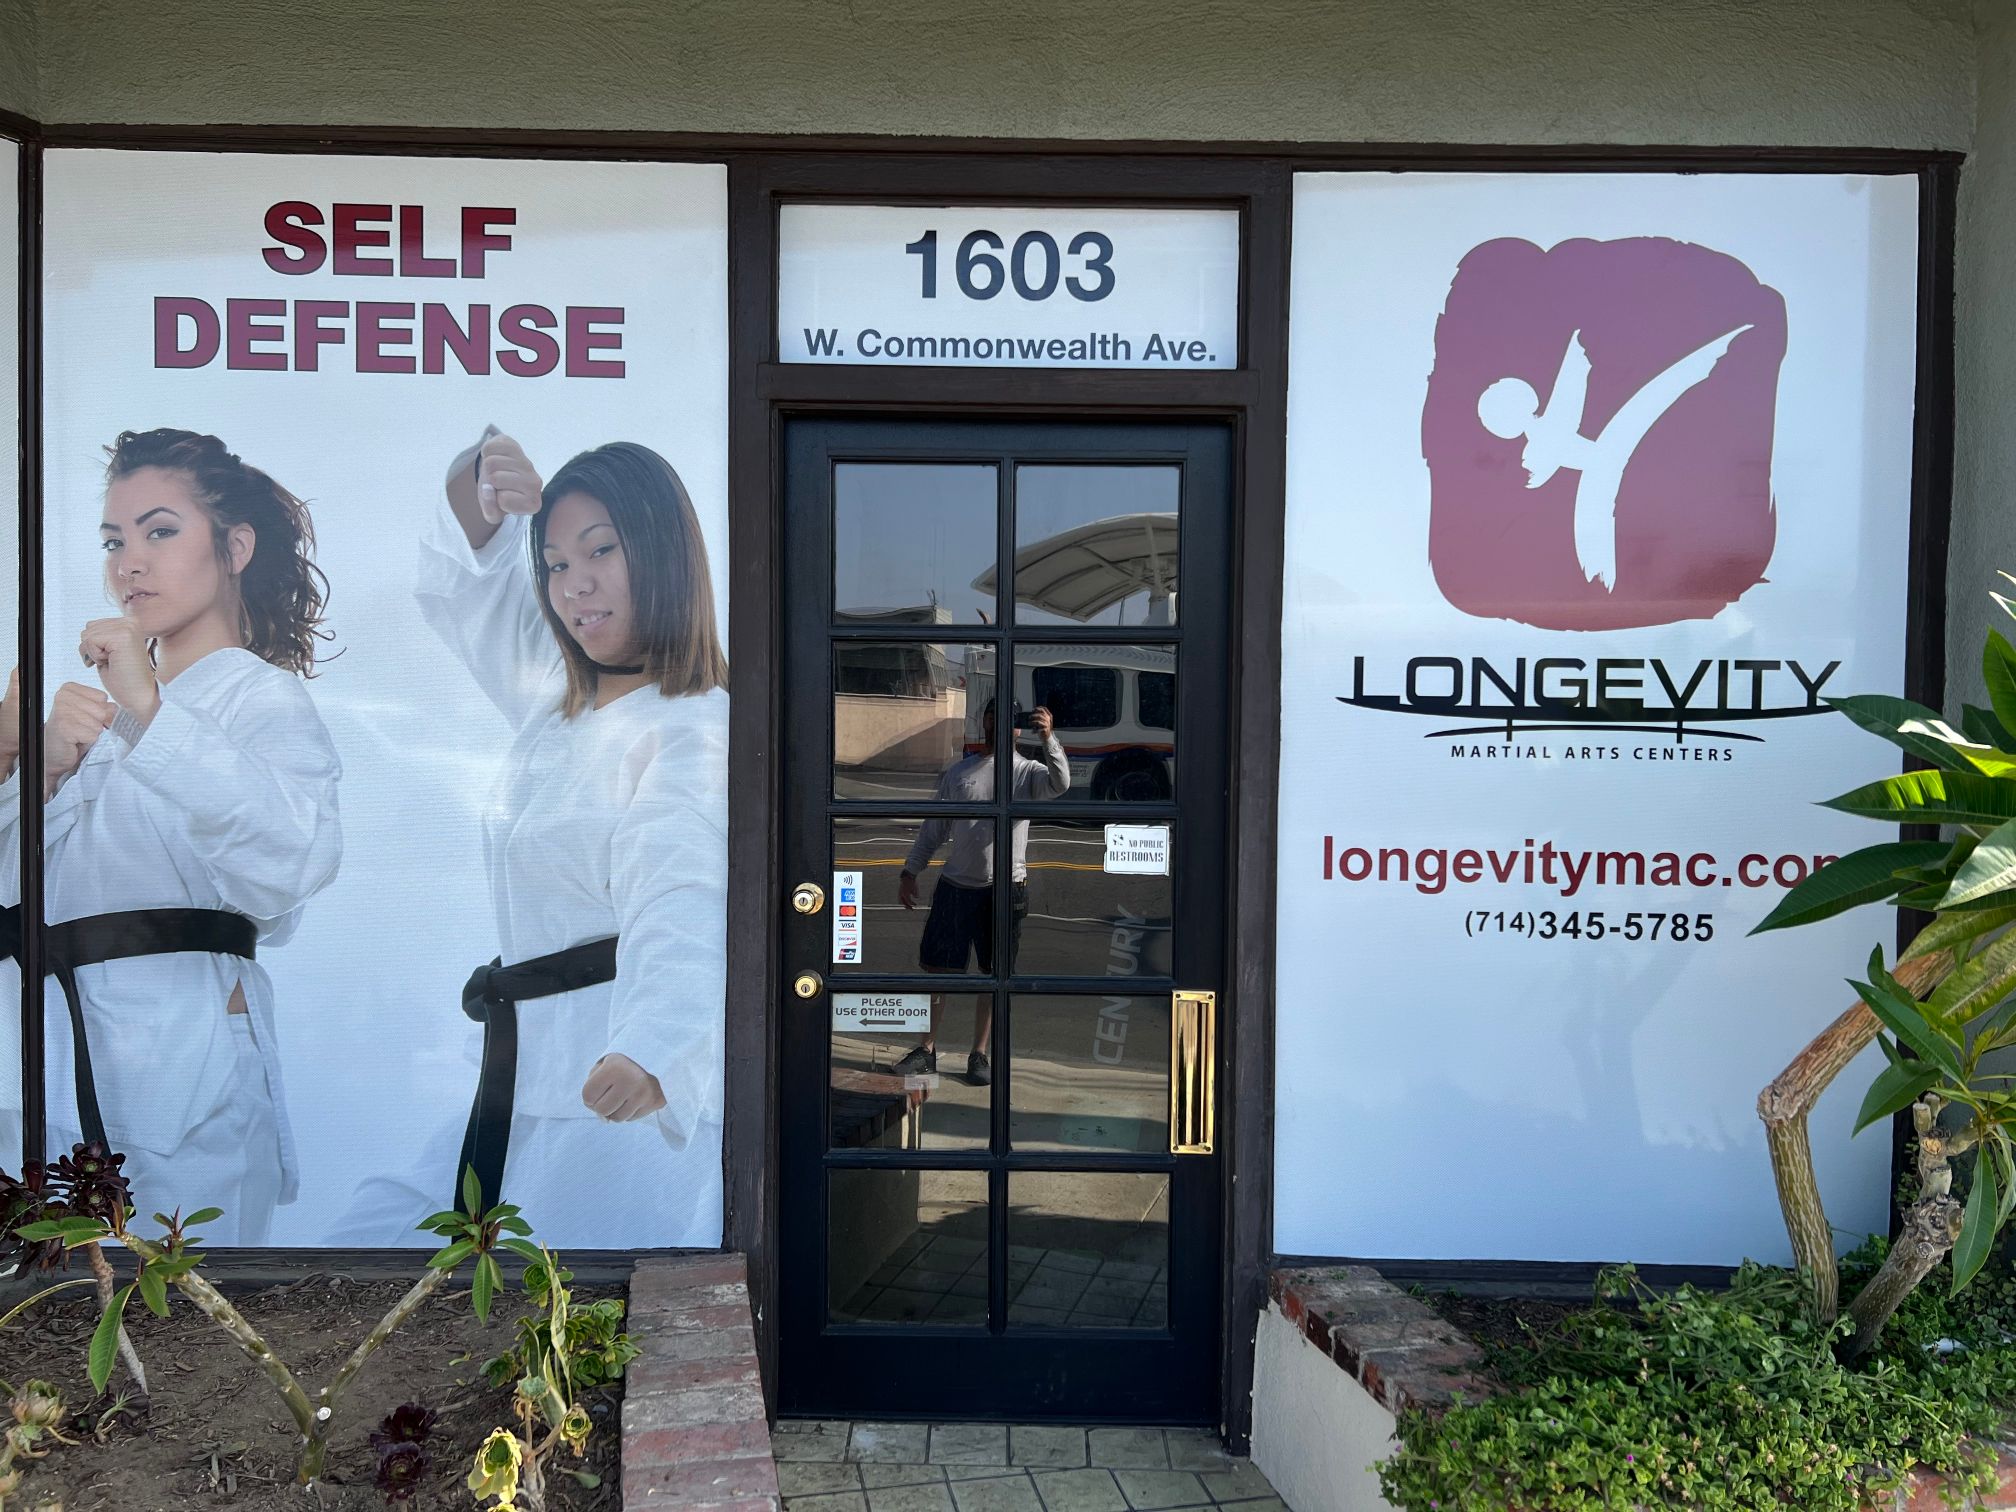 Perforated Window Graphics Advertise for Fullerton Karate Academy 24/7